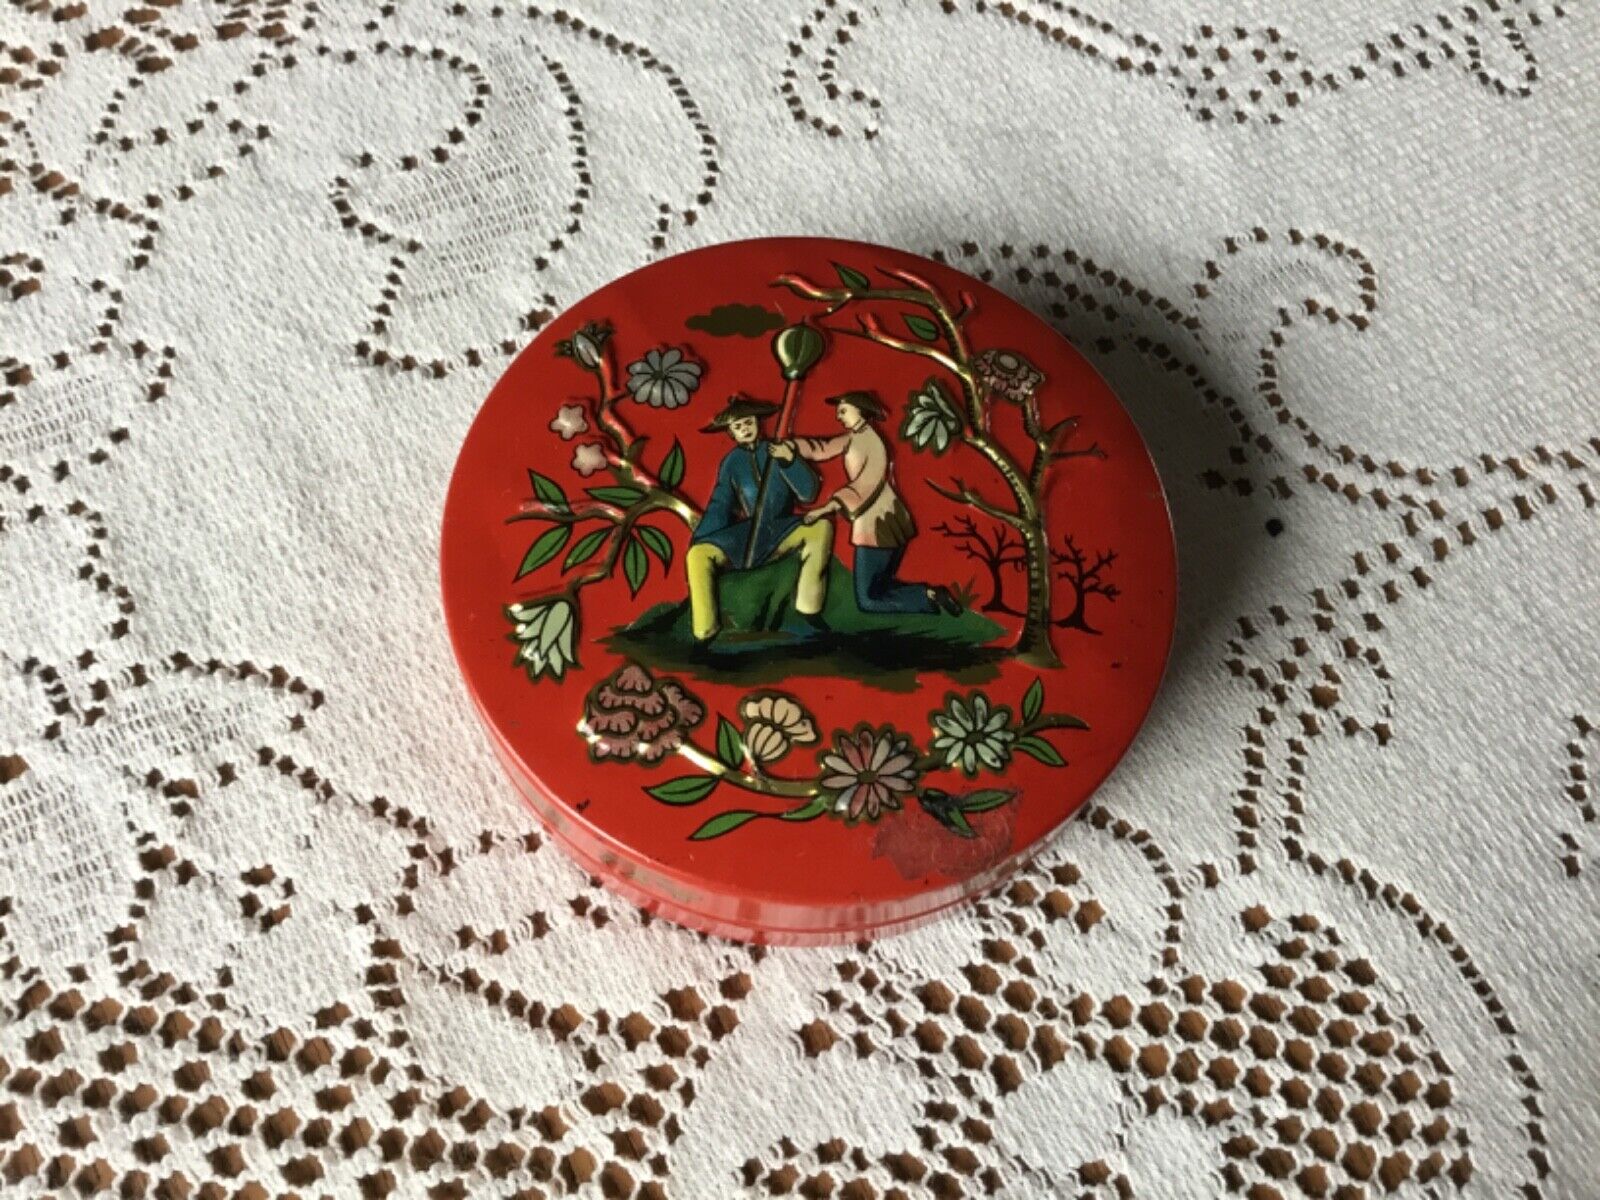 Vintage BARET WARE Metal Trinket Box, Pill Box, Miniature Container, Red